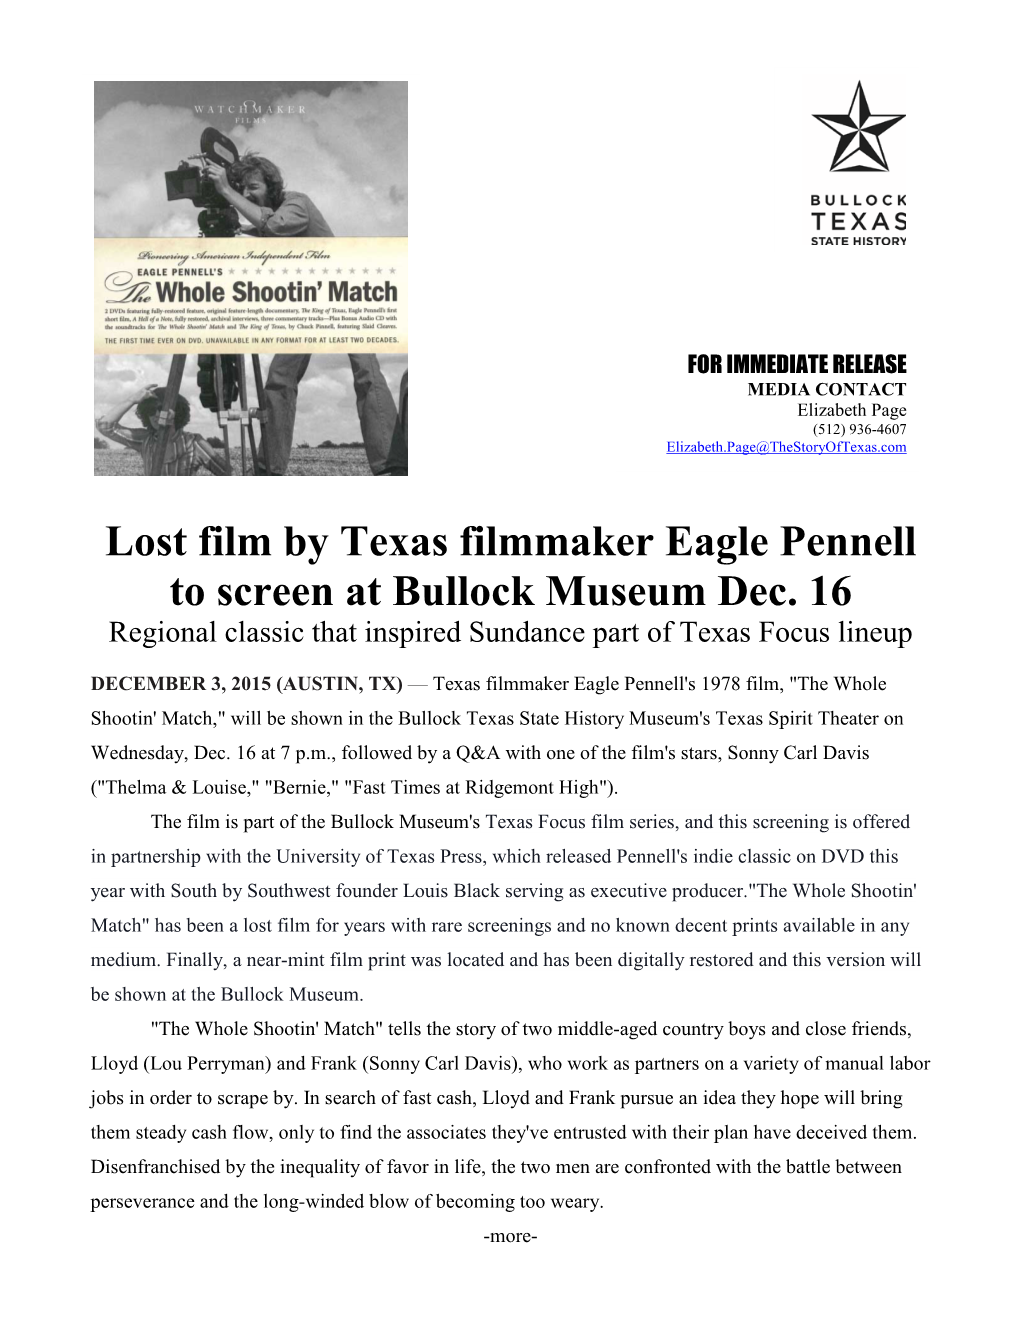 Lost Film by Texas Filmmaker Eagle Pennell to Screen at Bullock Museum Dec